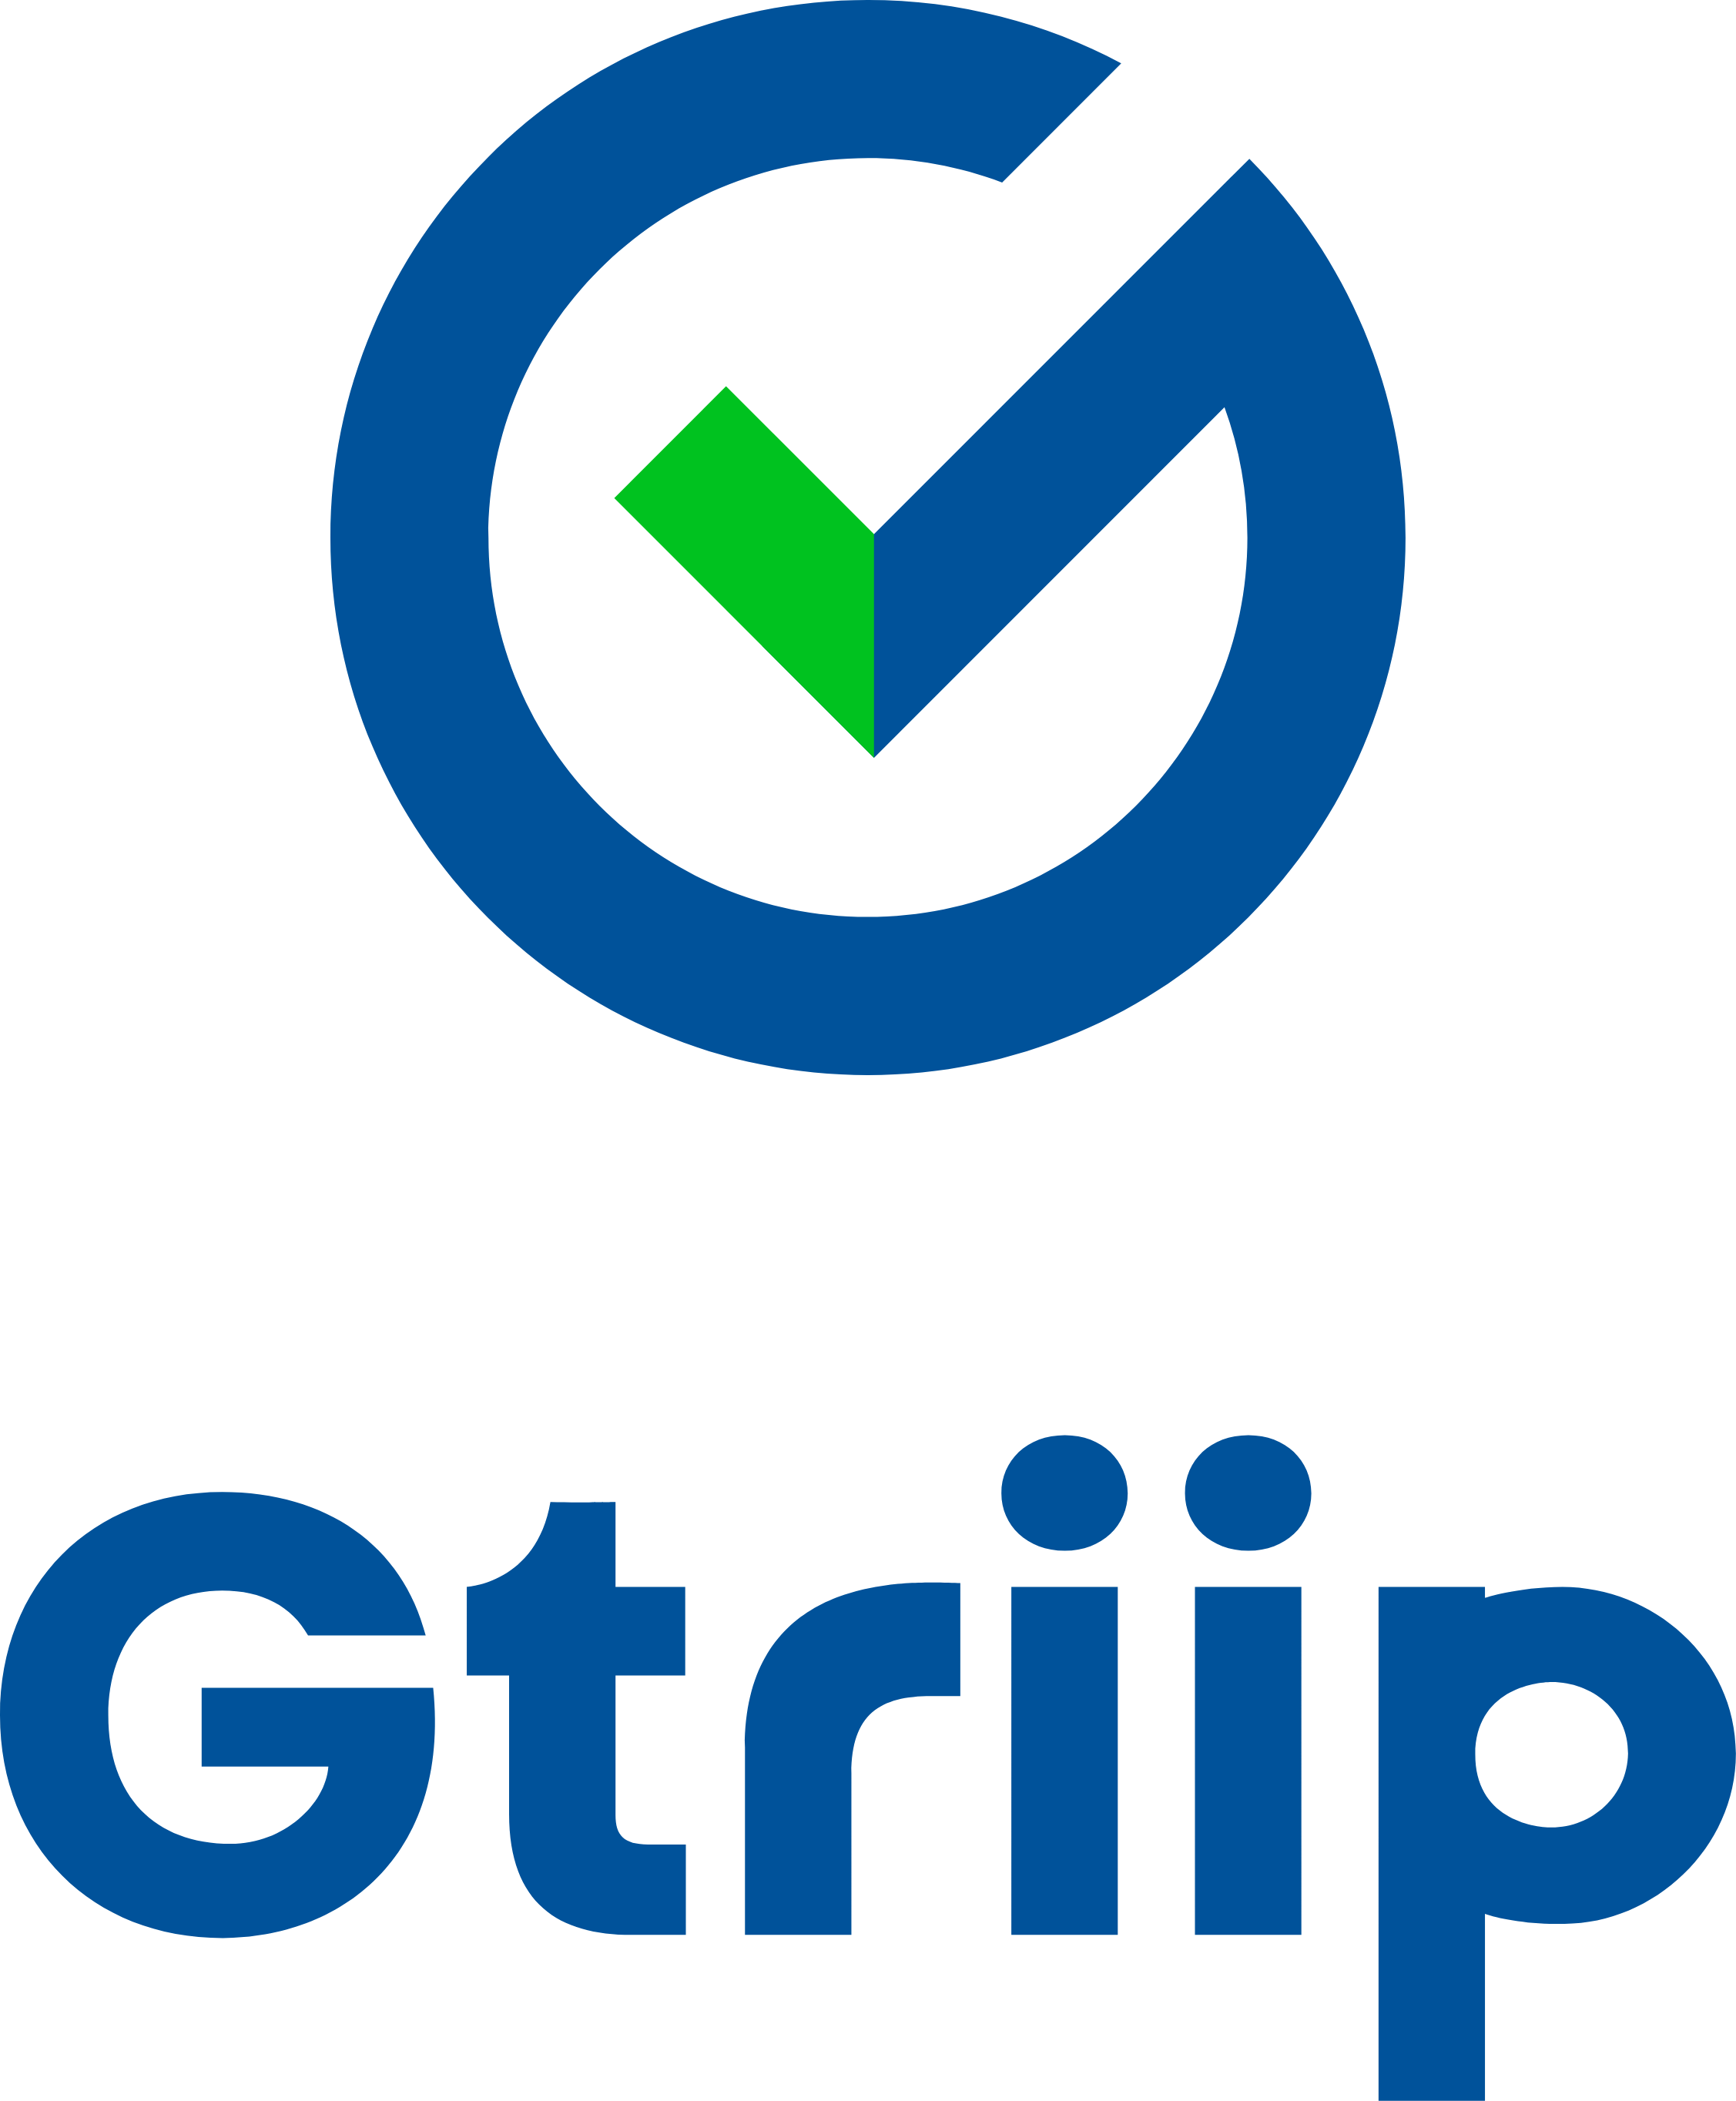 Gtriip - Hotel Contactless Check-In Technology, Check-in With Selfie